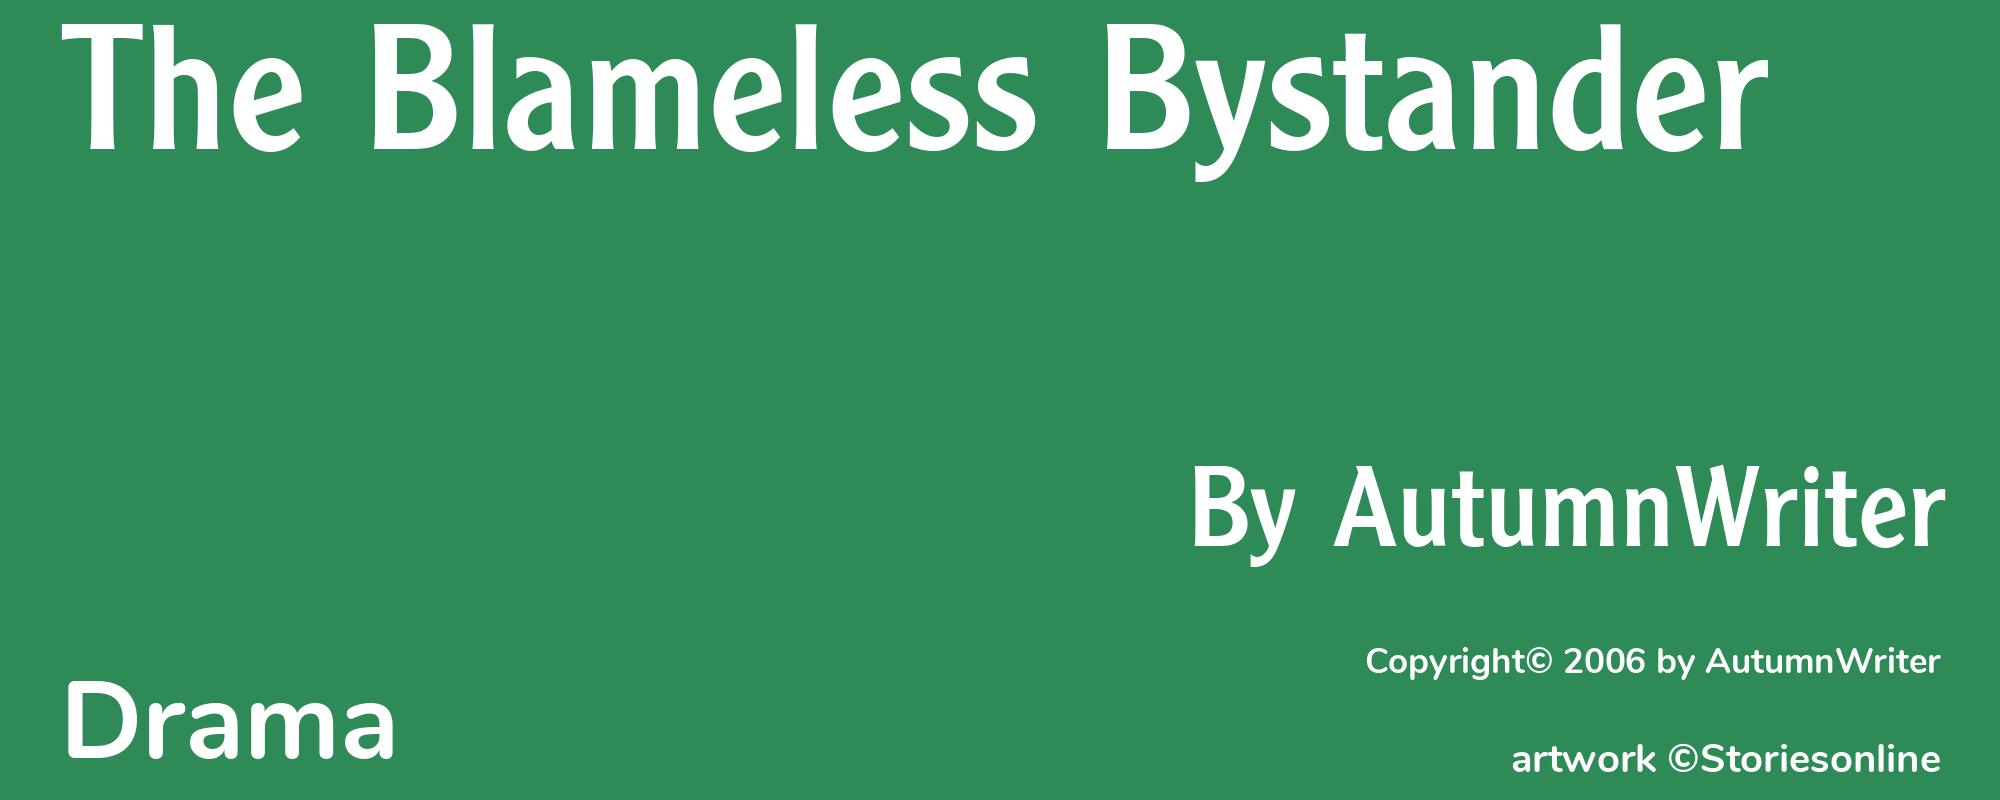 The Blameless Bystander - Cover